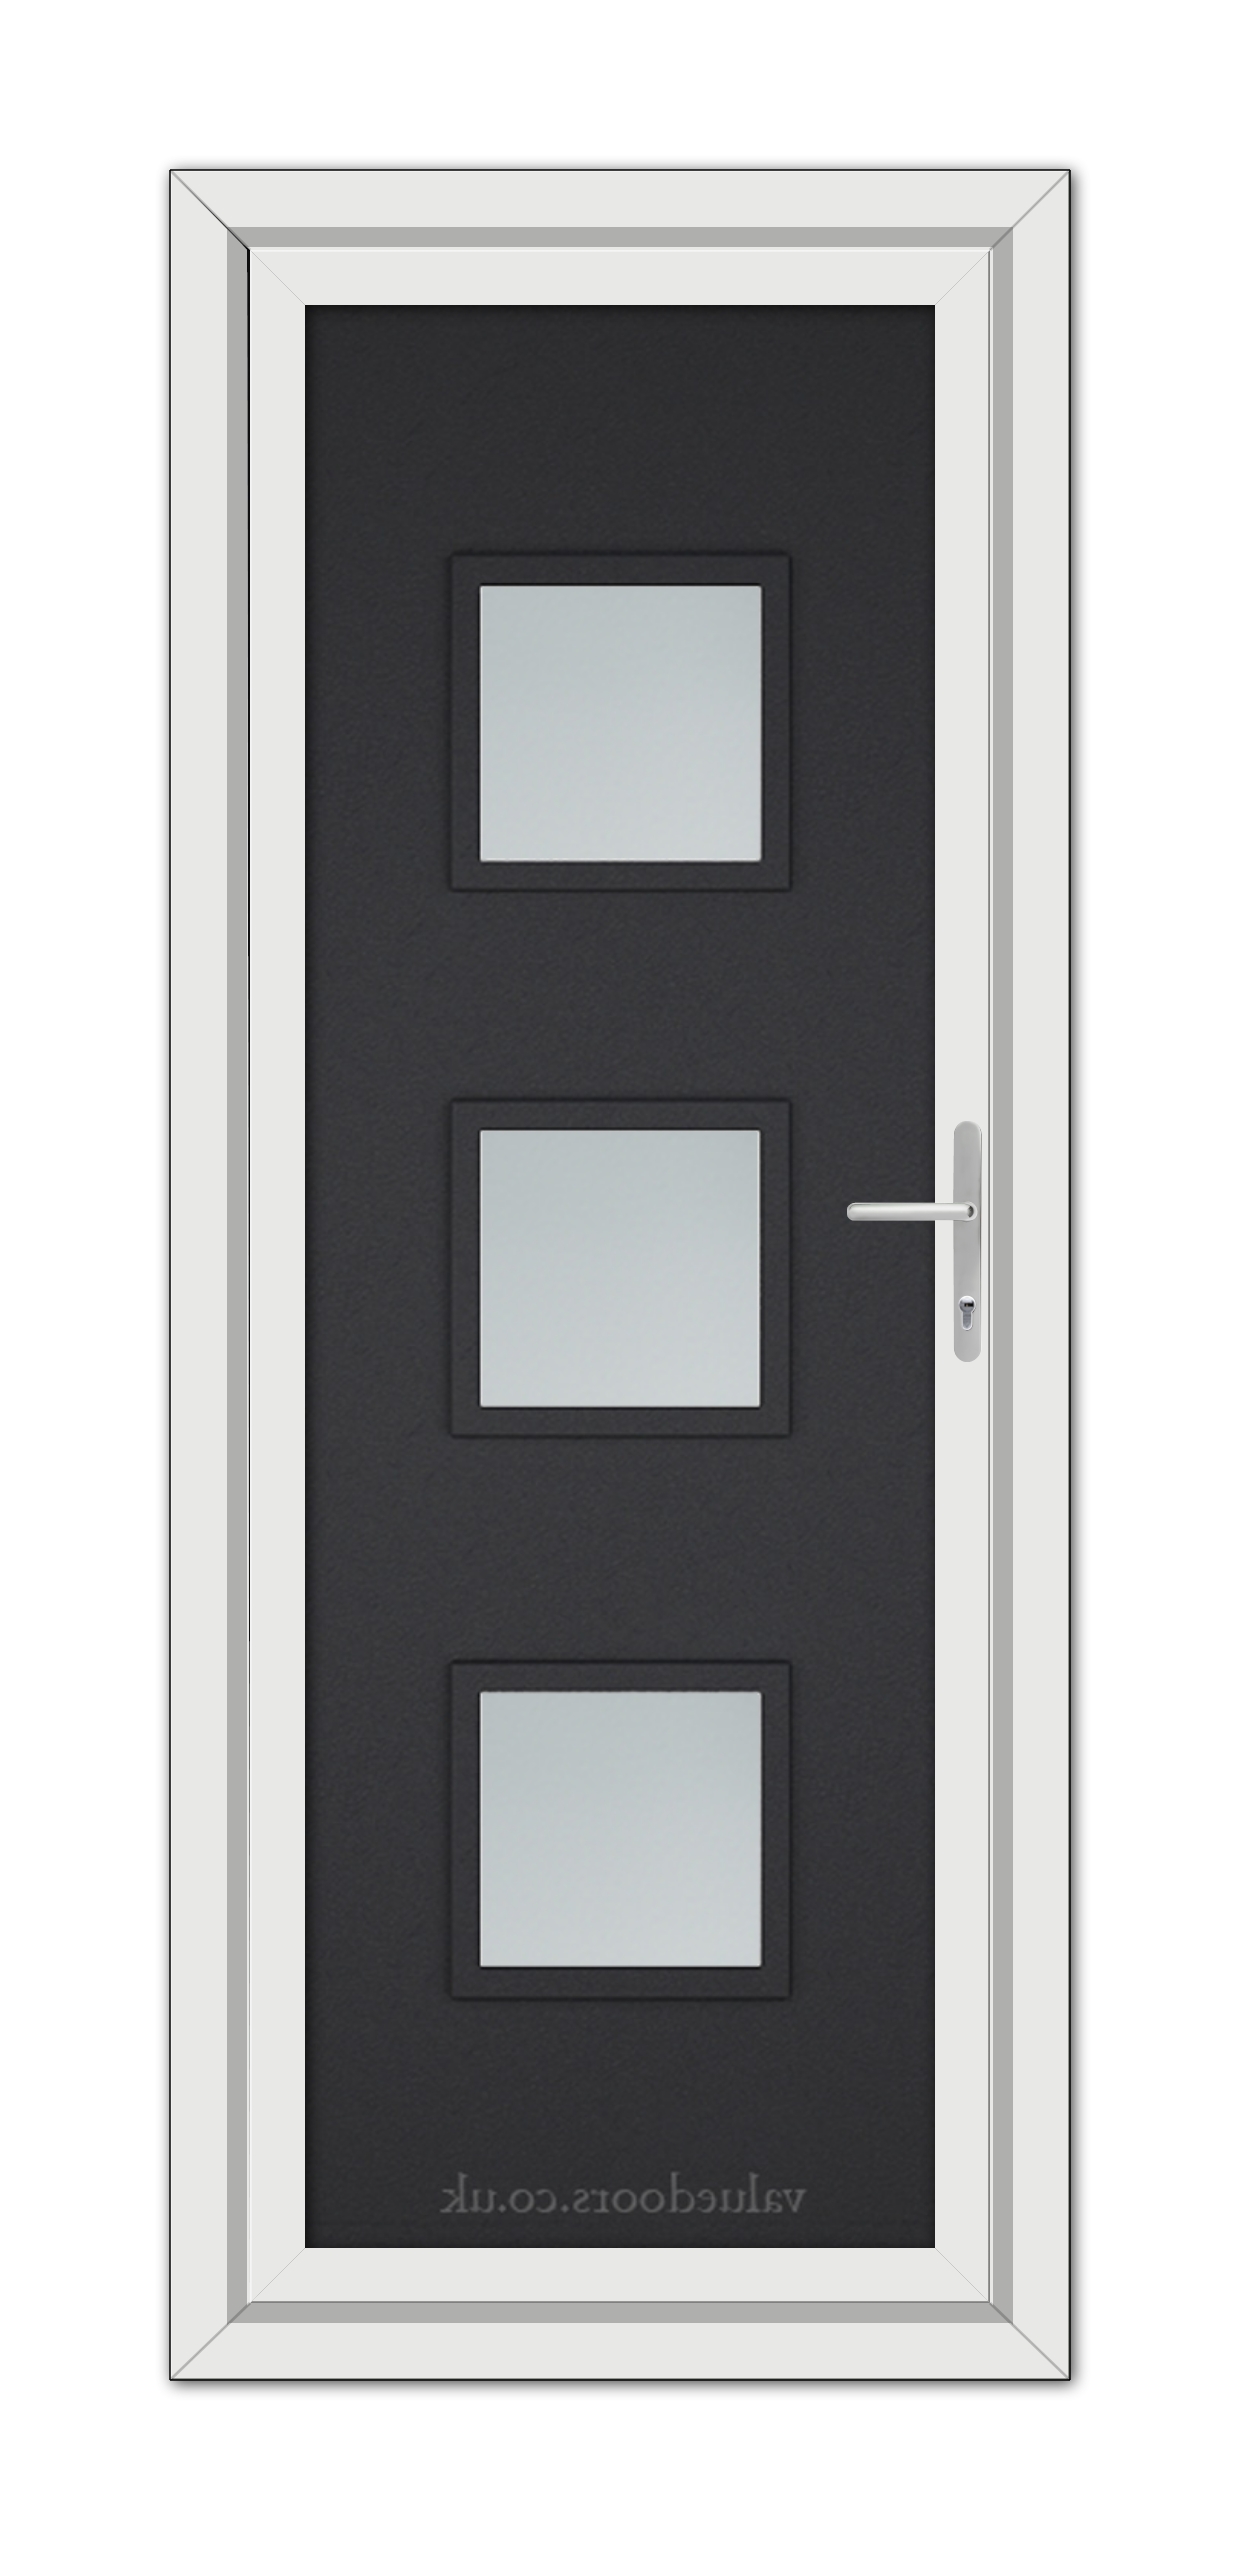 A Black Brown Modern 5013 uPVC Door with three vertical frosted glass panels and a metallic handle, set within a white frame.